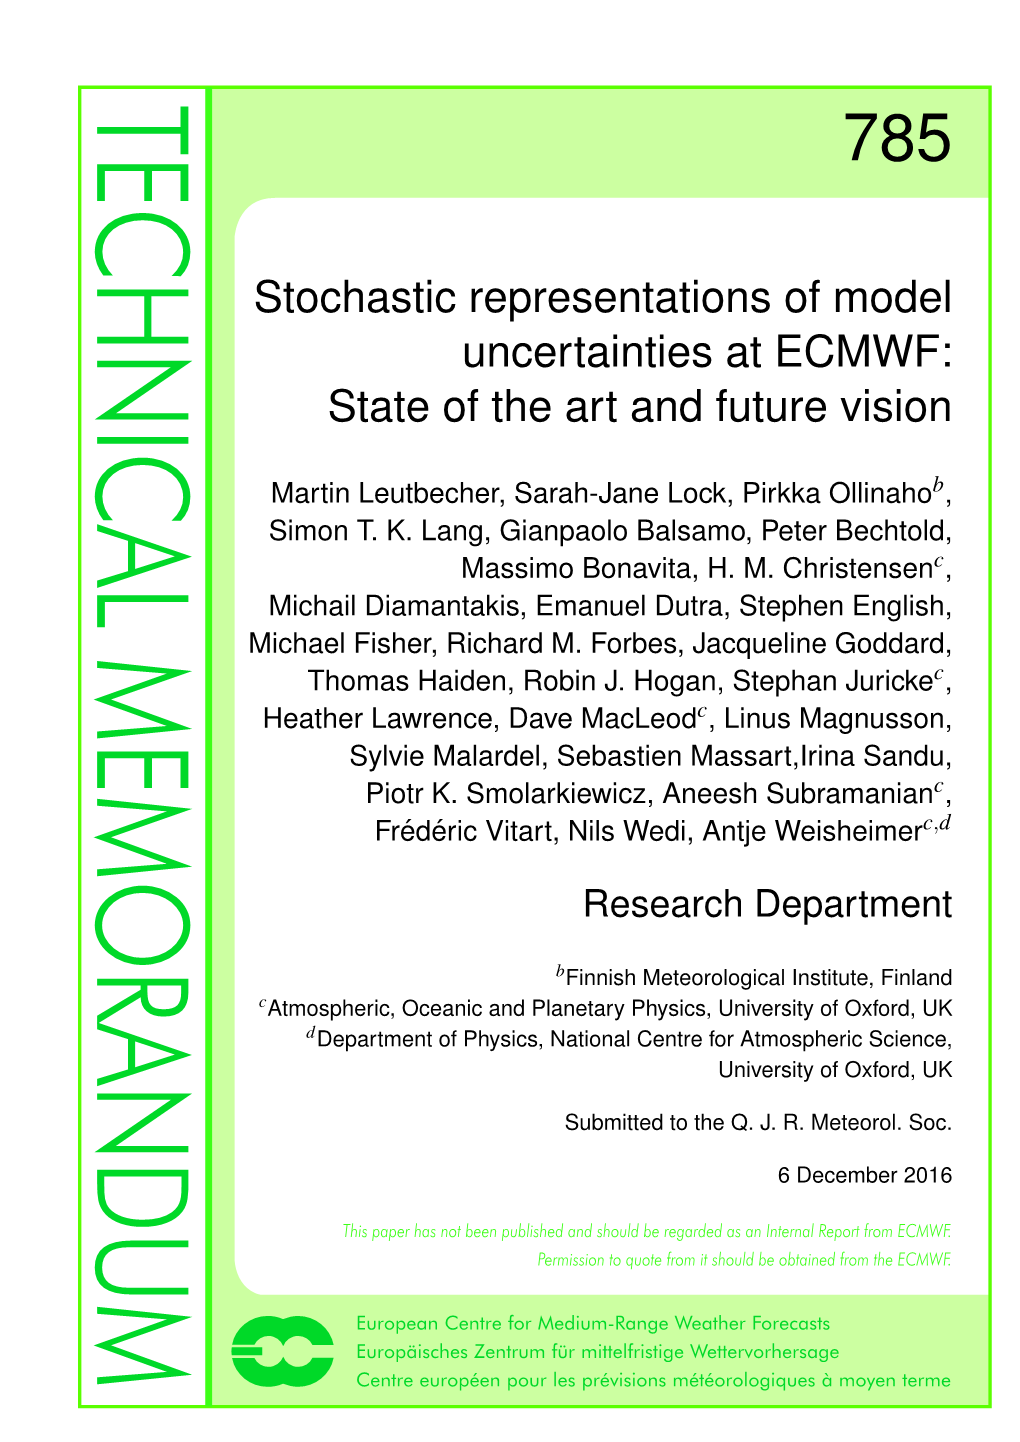 Stochastic Representations of Model Uncertainties at ECMWF: State of the Art and Future Vision